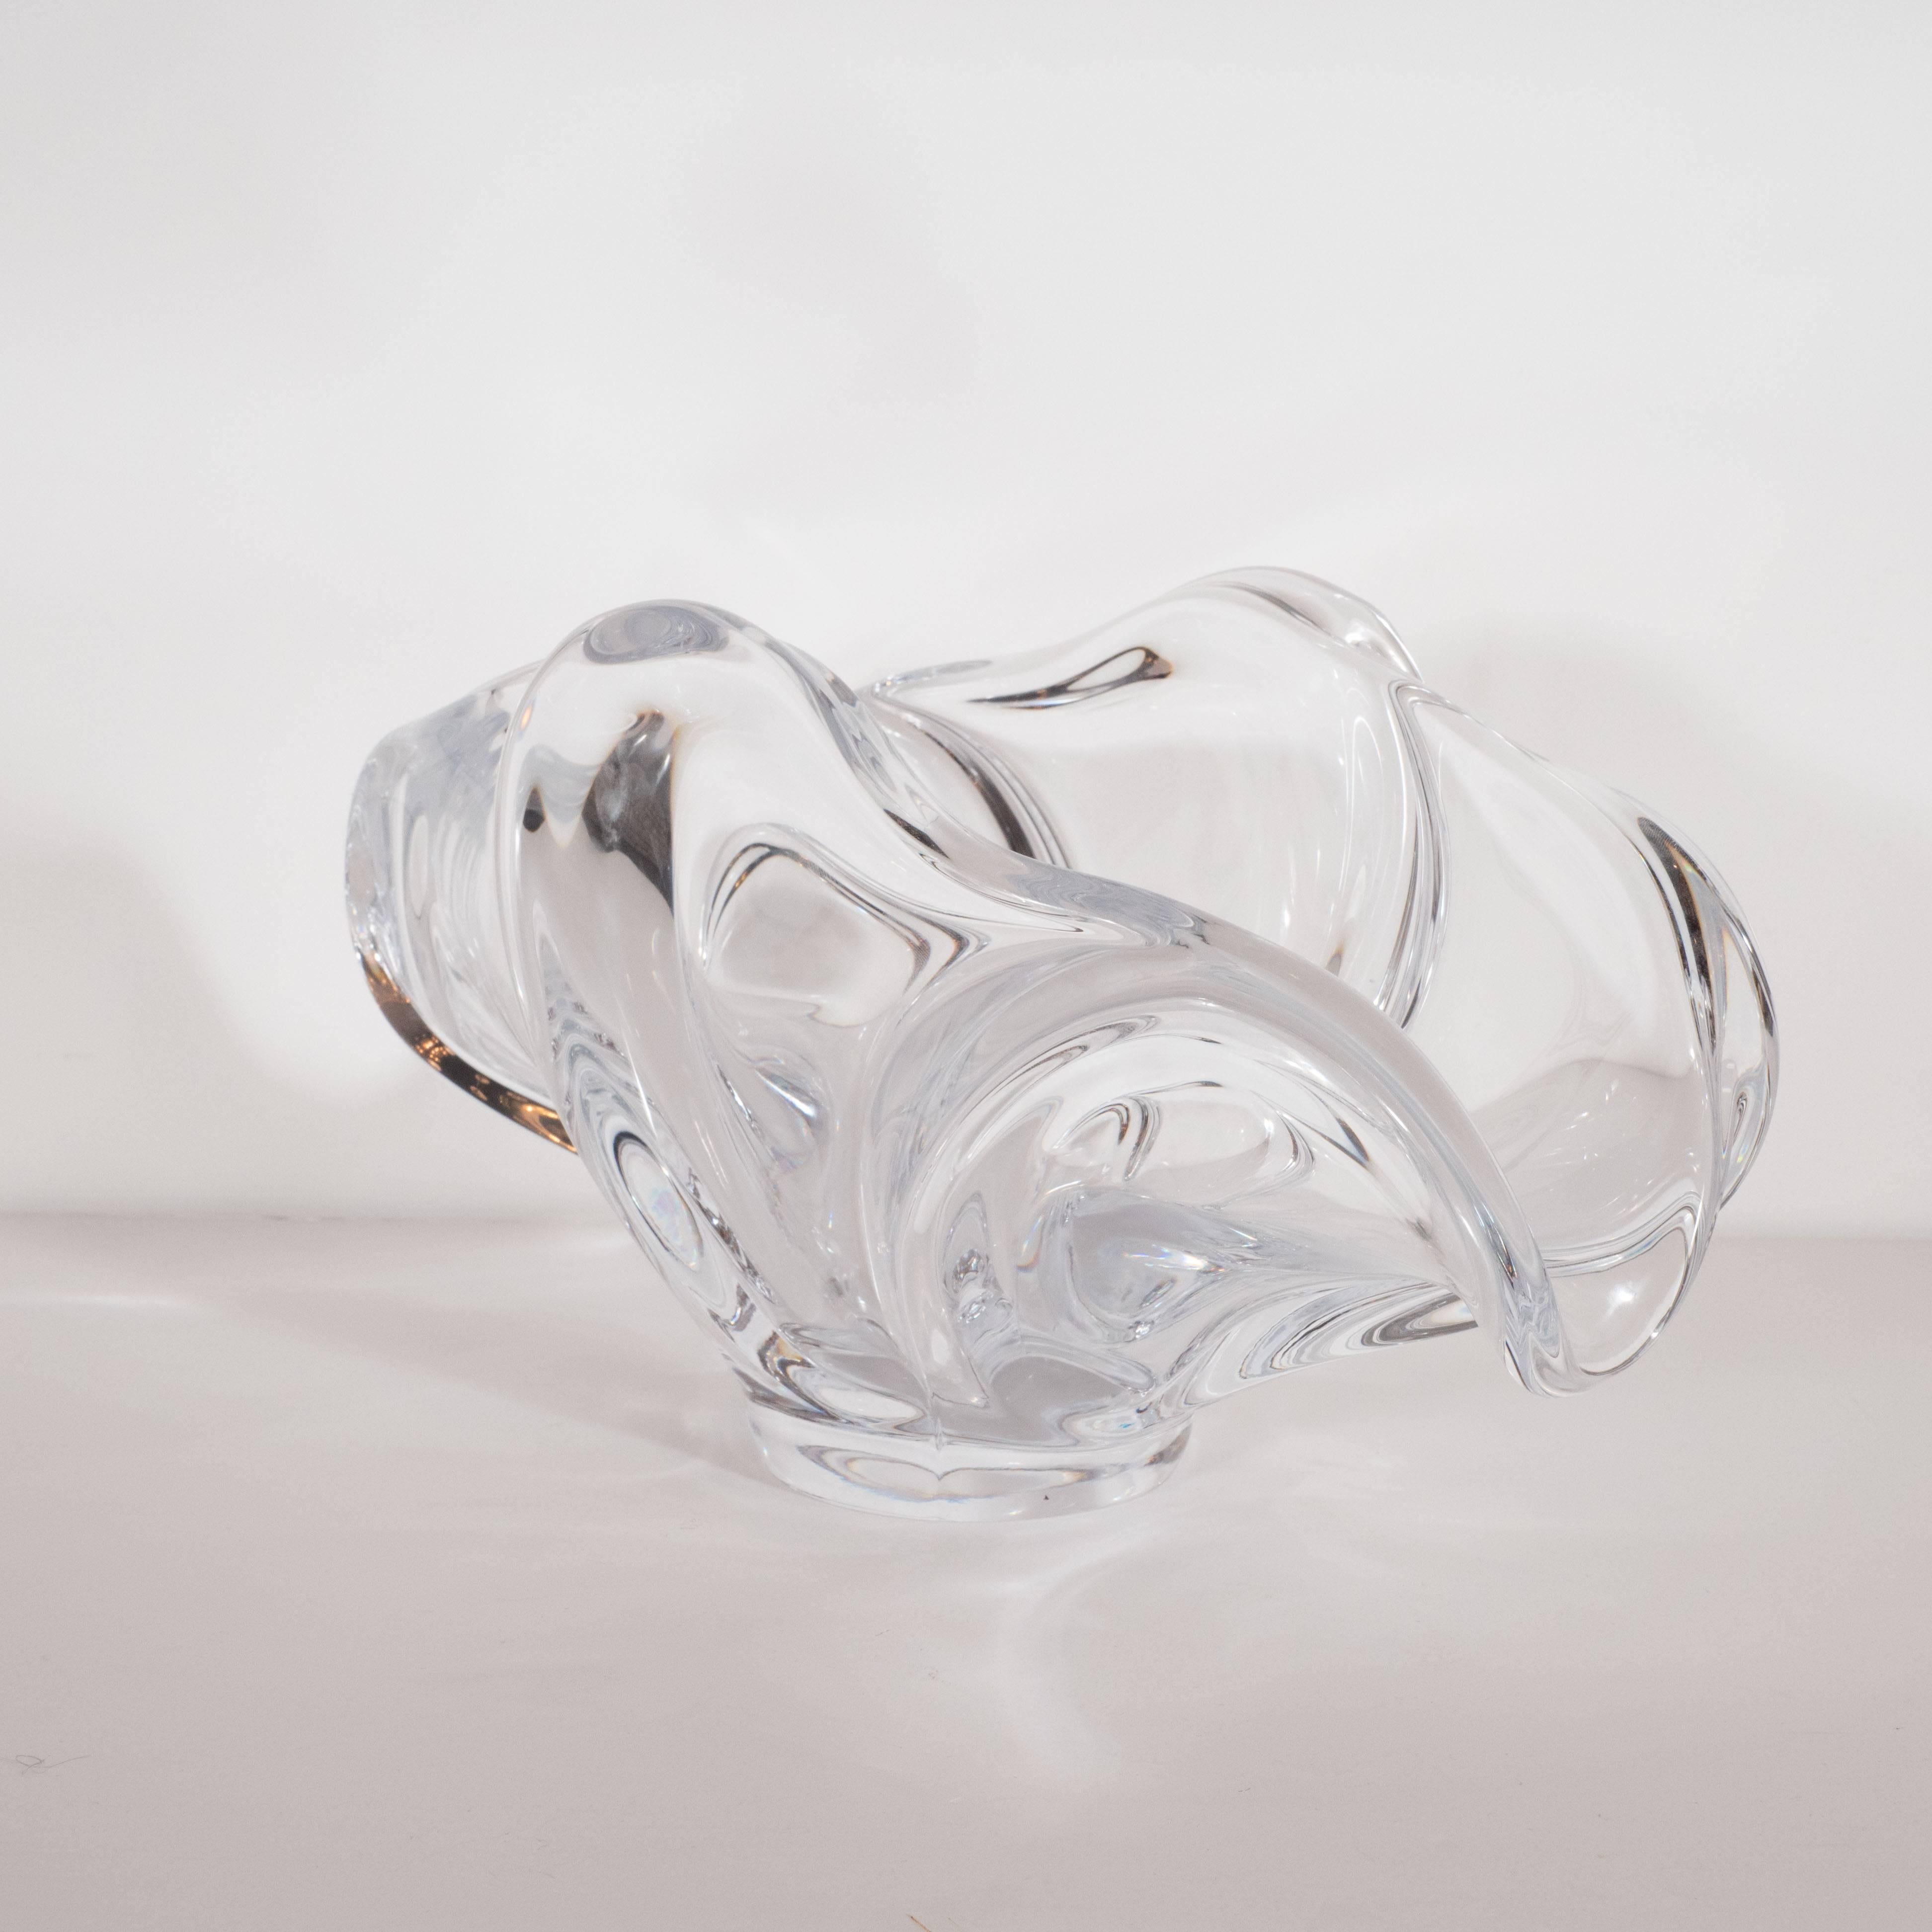 This dramatic and sculptural bowl was realized by the fabled French glass making studio- Art Vannes- circa 1950. It features raised sides and open ends with curvilinear forms throughout lending it the appearance of flowing silk fabric. With its